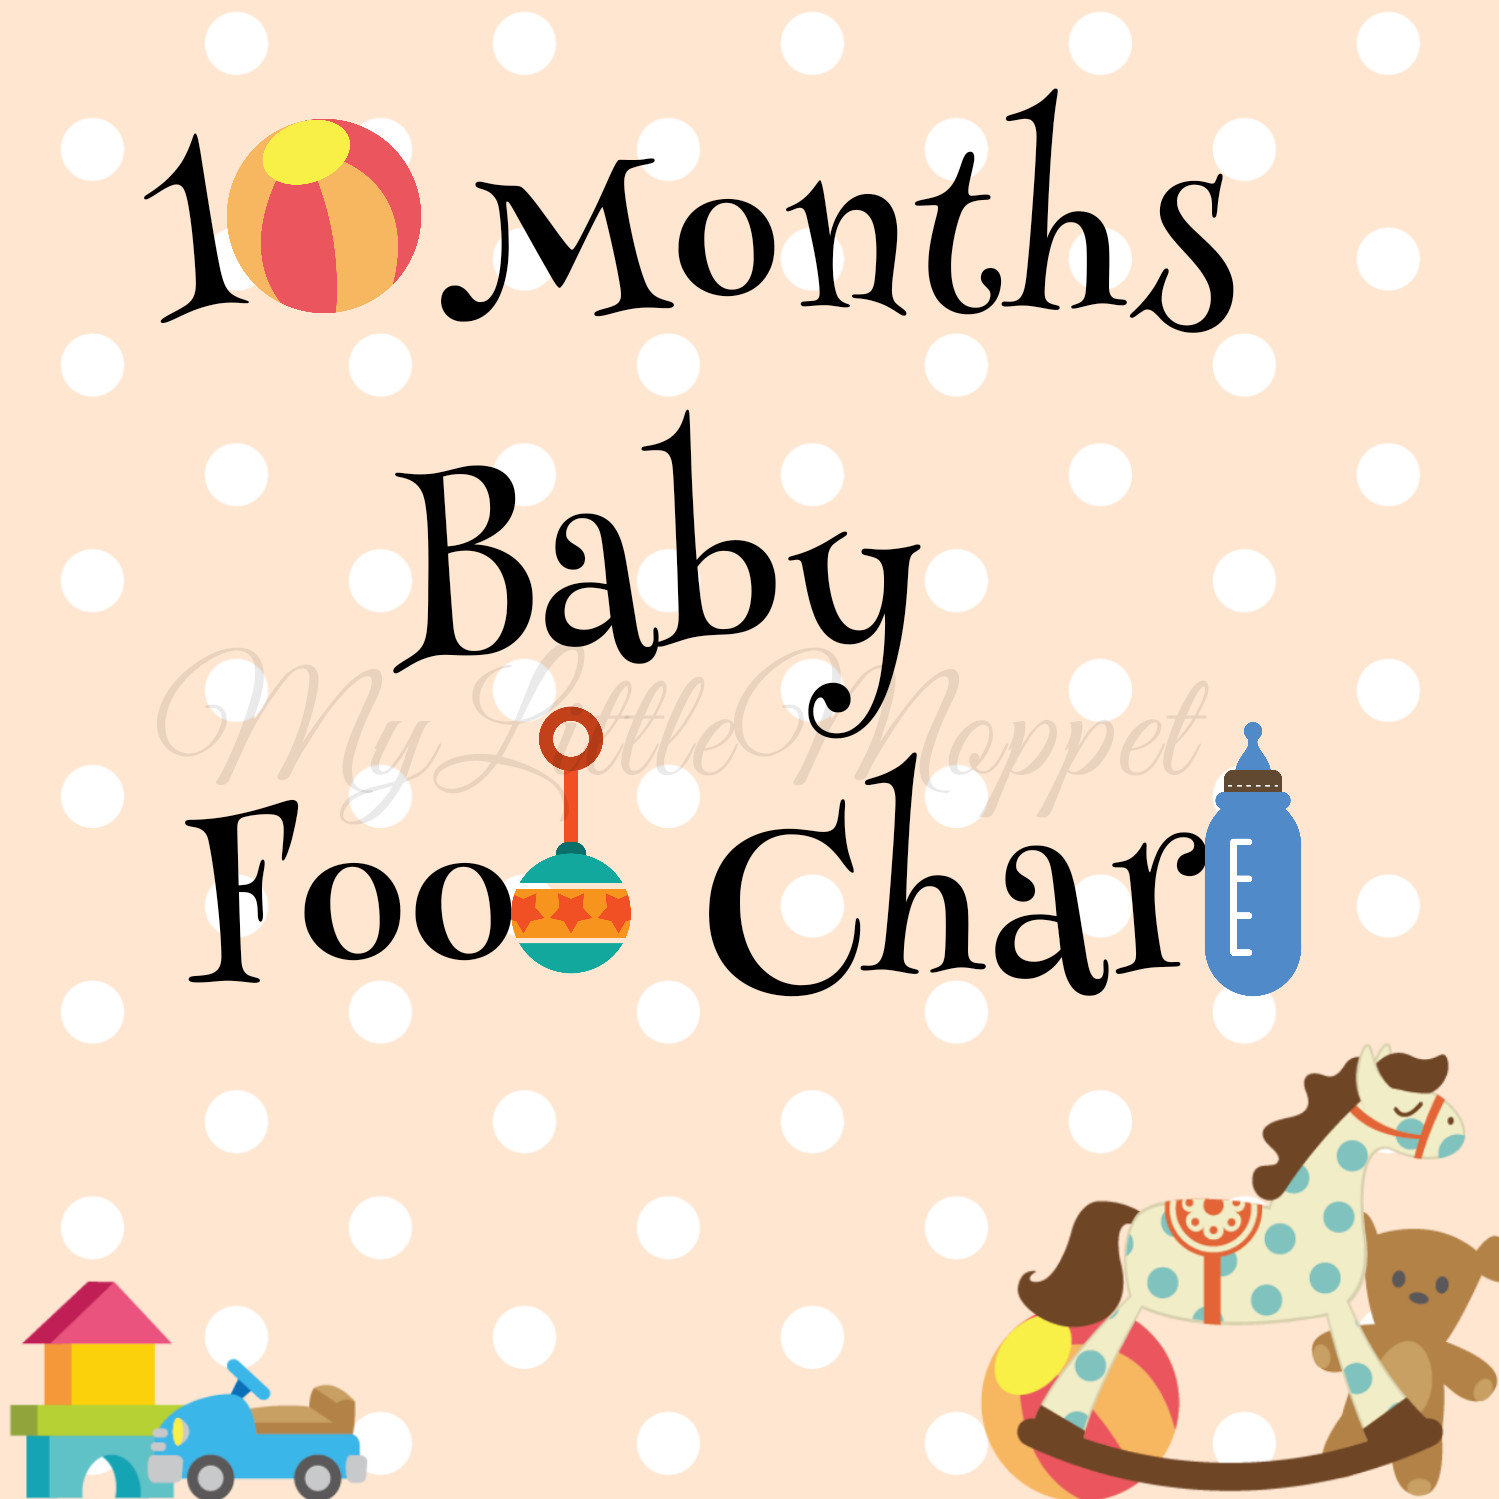 Baby Food Recipes 10 Months
 10 Months Baby Food Chart with Indian Recipes